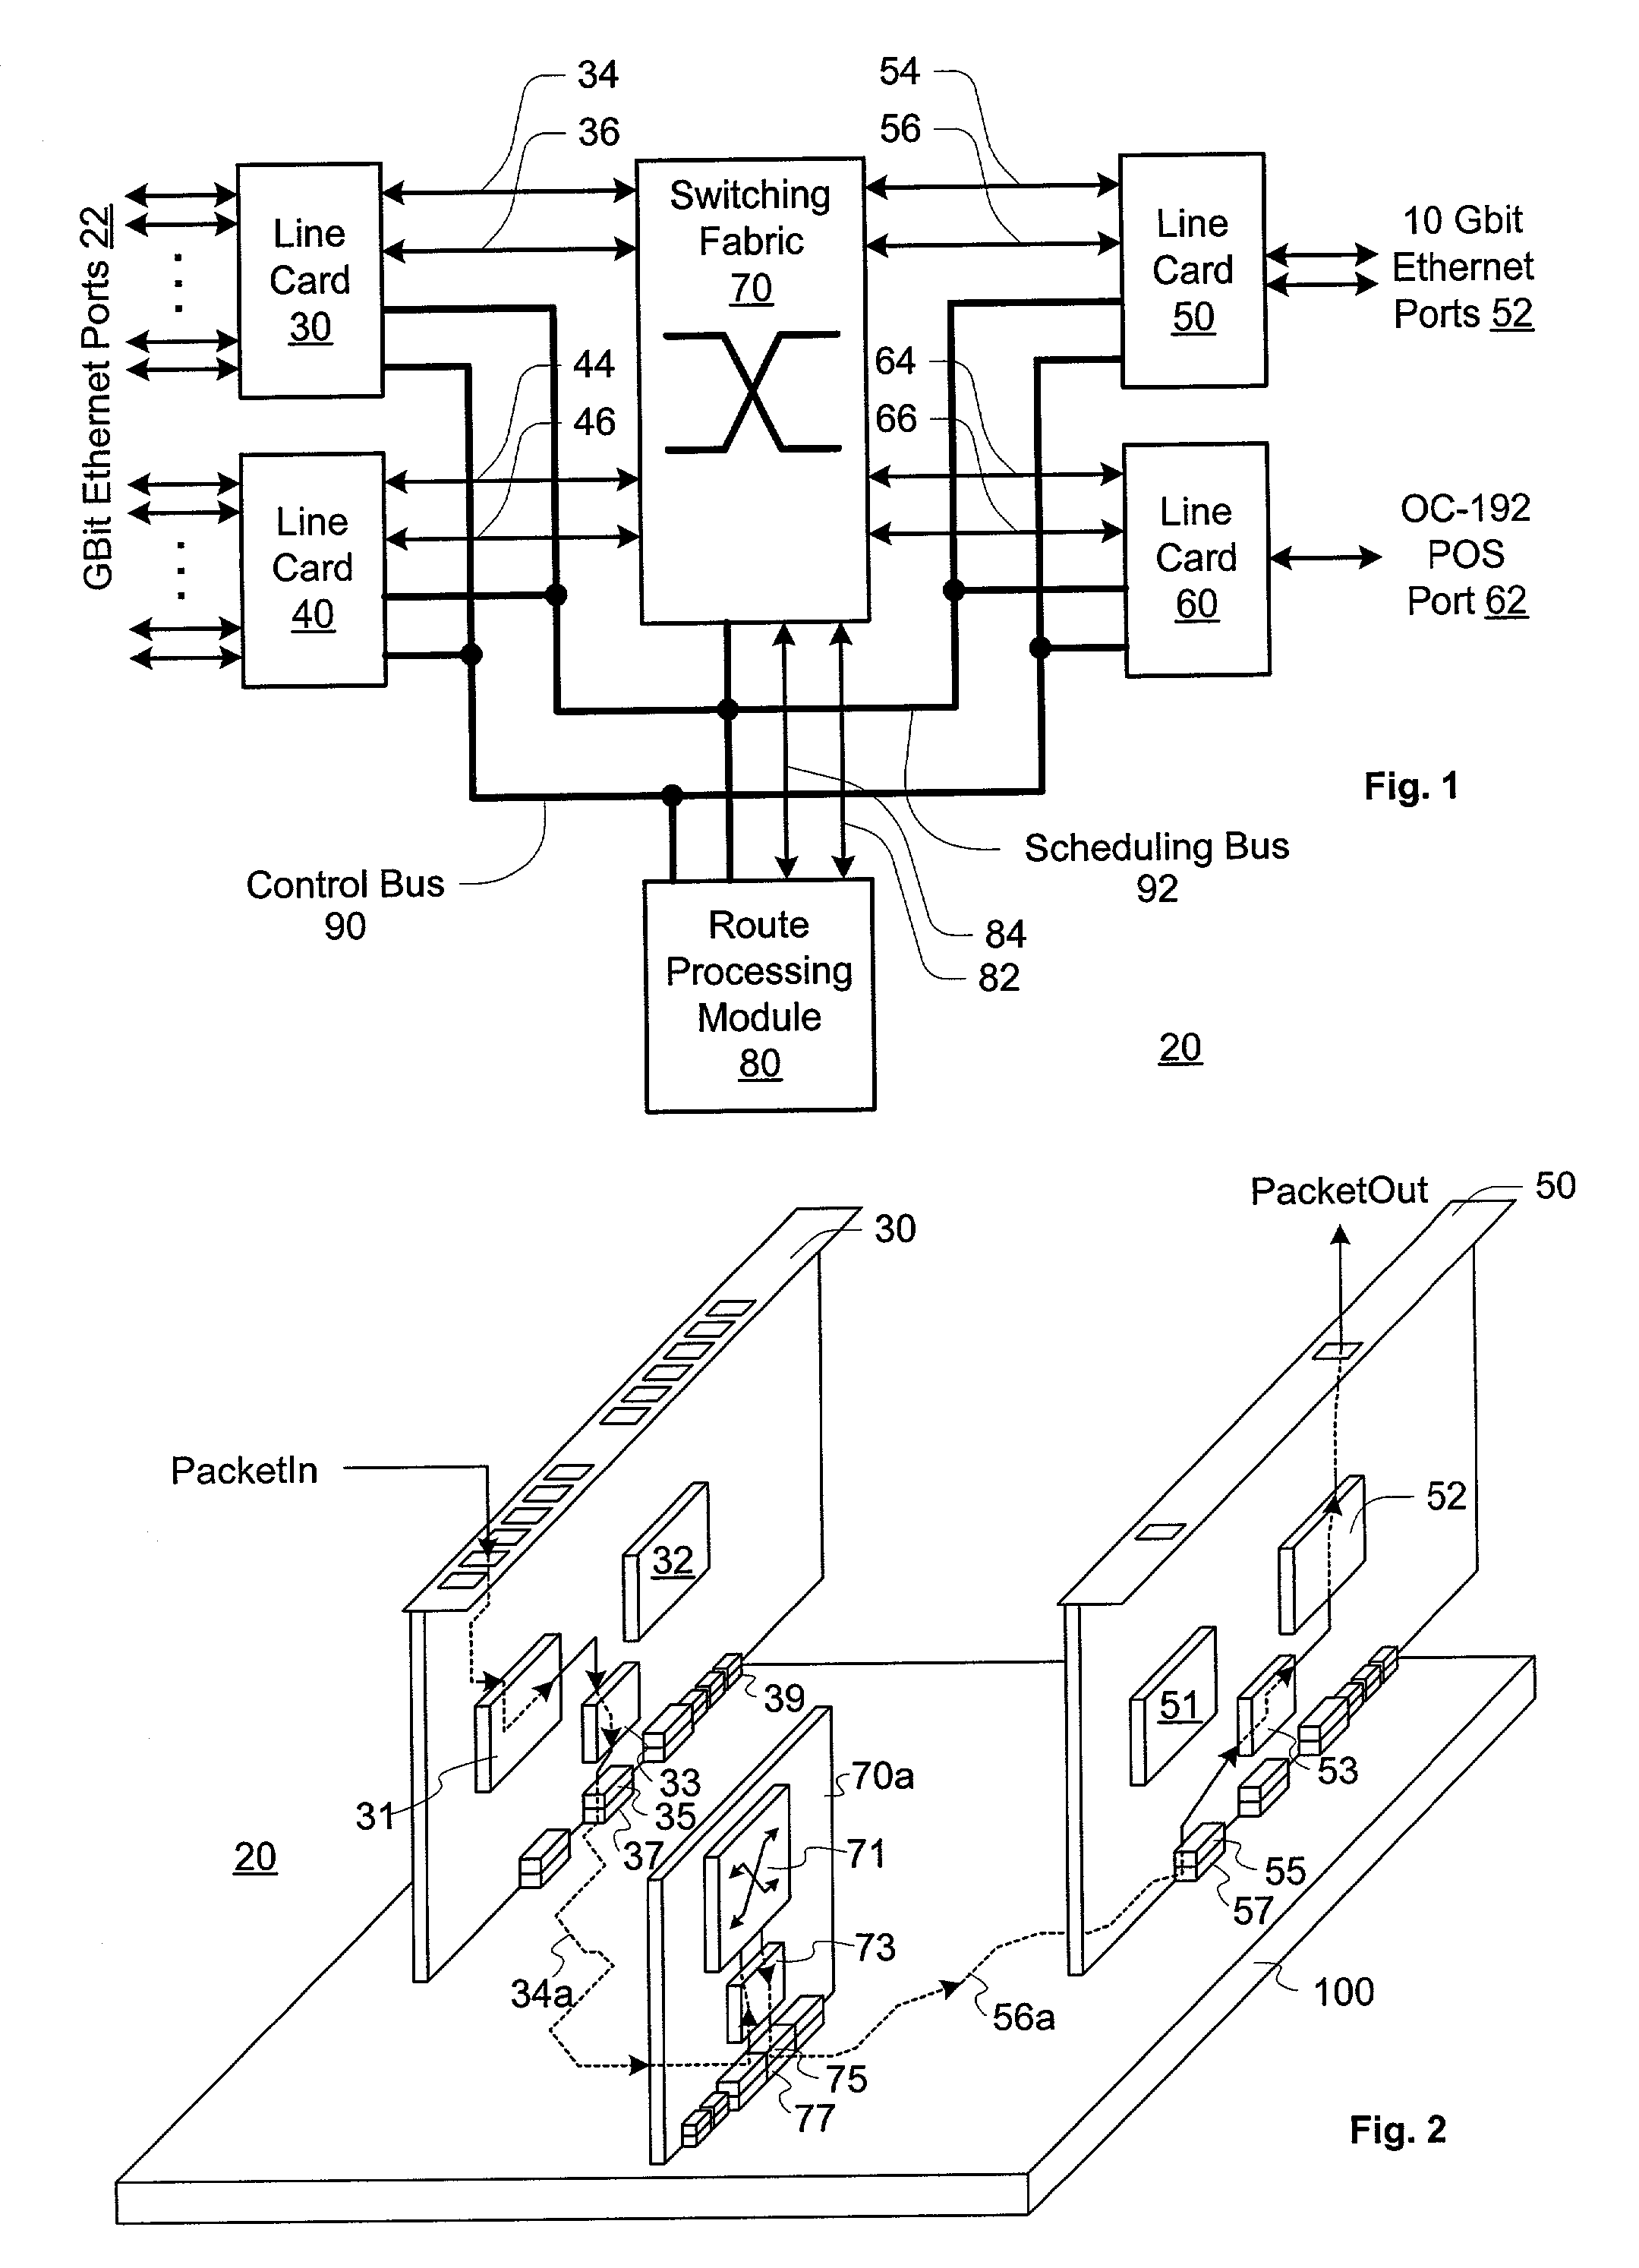 High-speed router with single backplane distributing both power and signaling